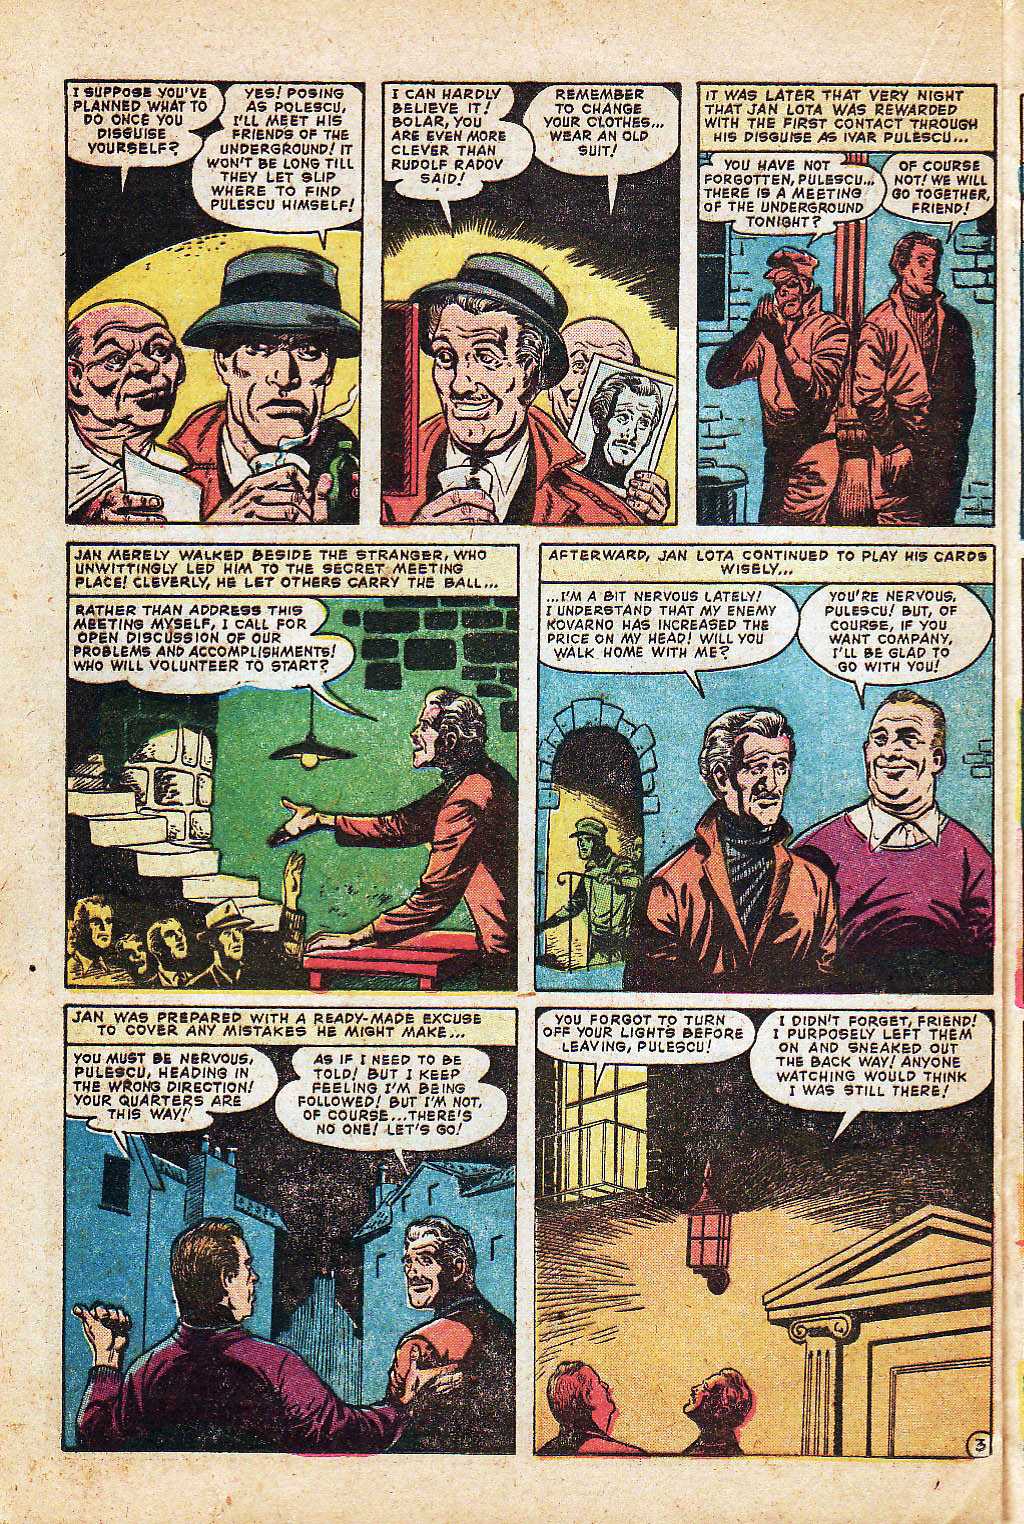 Marvel Tales (1949) 154 Page 19